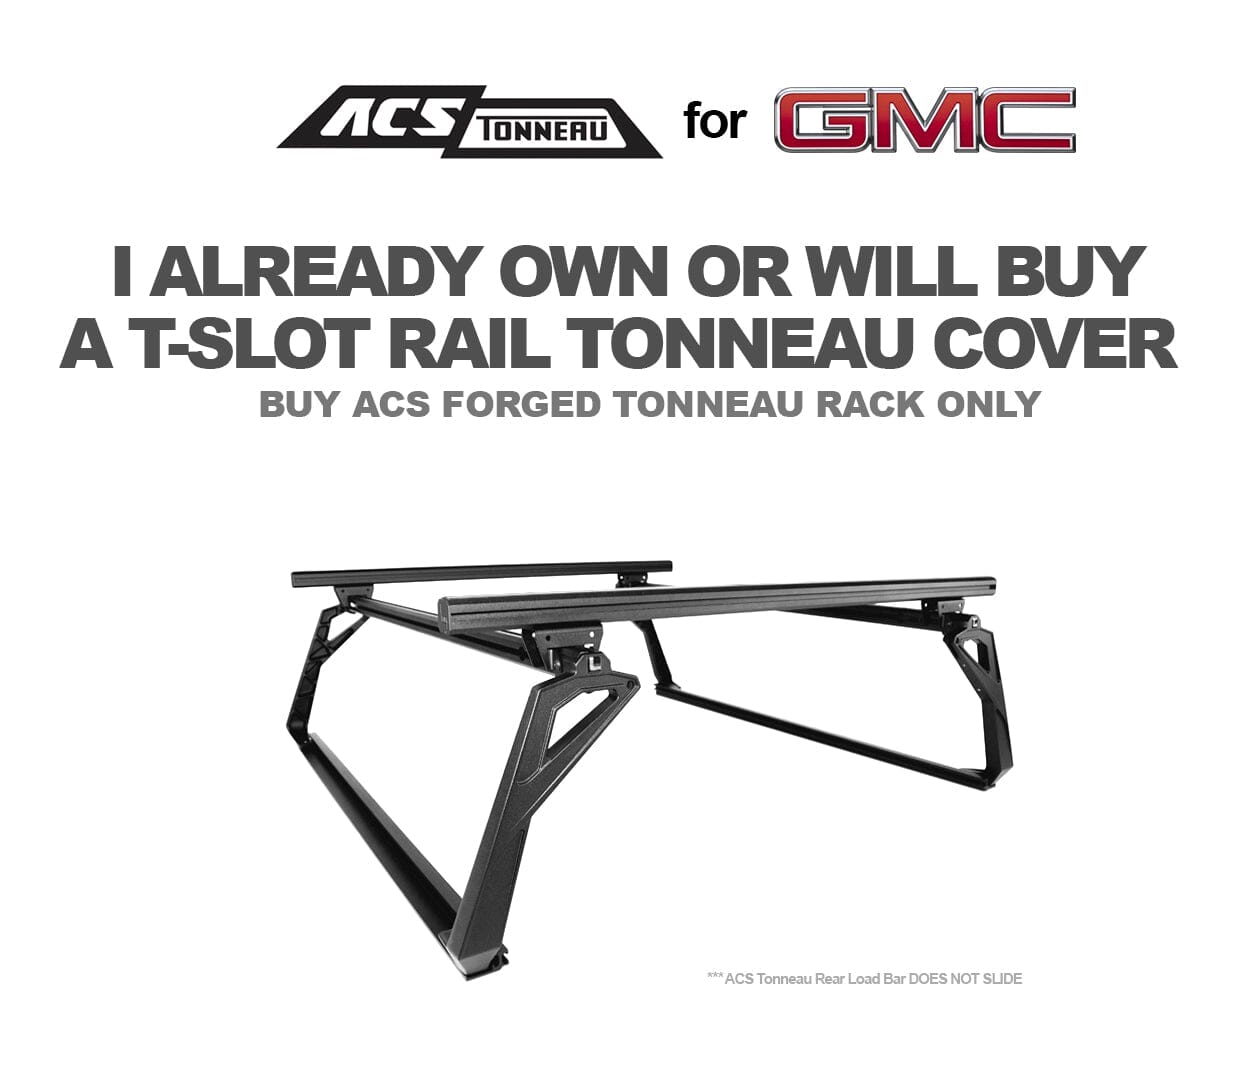 ACS Forged Tonneau - Rack Only - GMC  active-cargo-system Leitner Designs- Adventure Imports